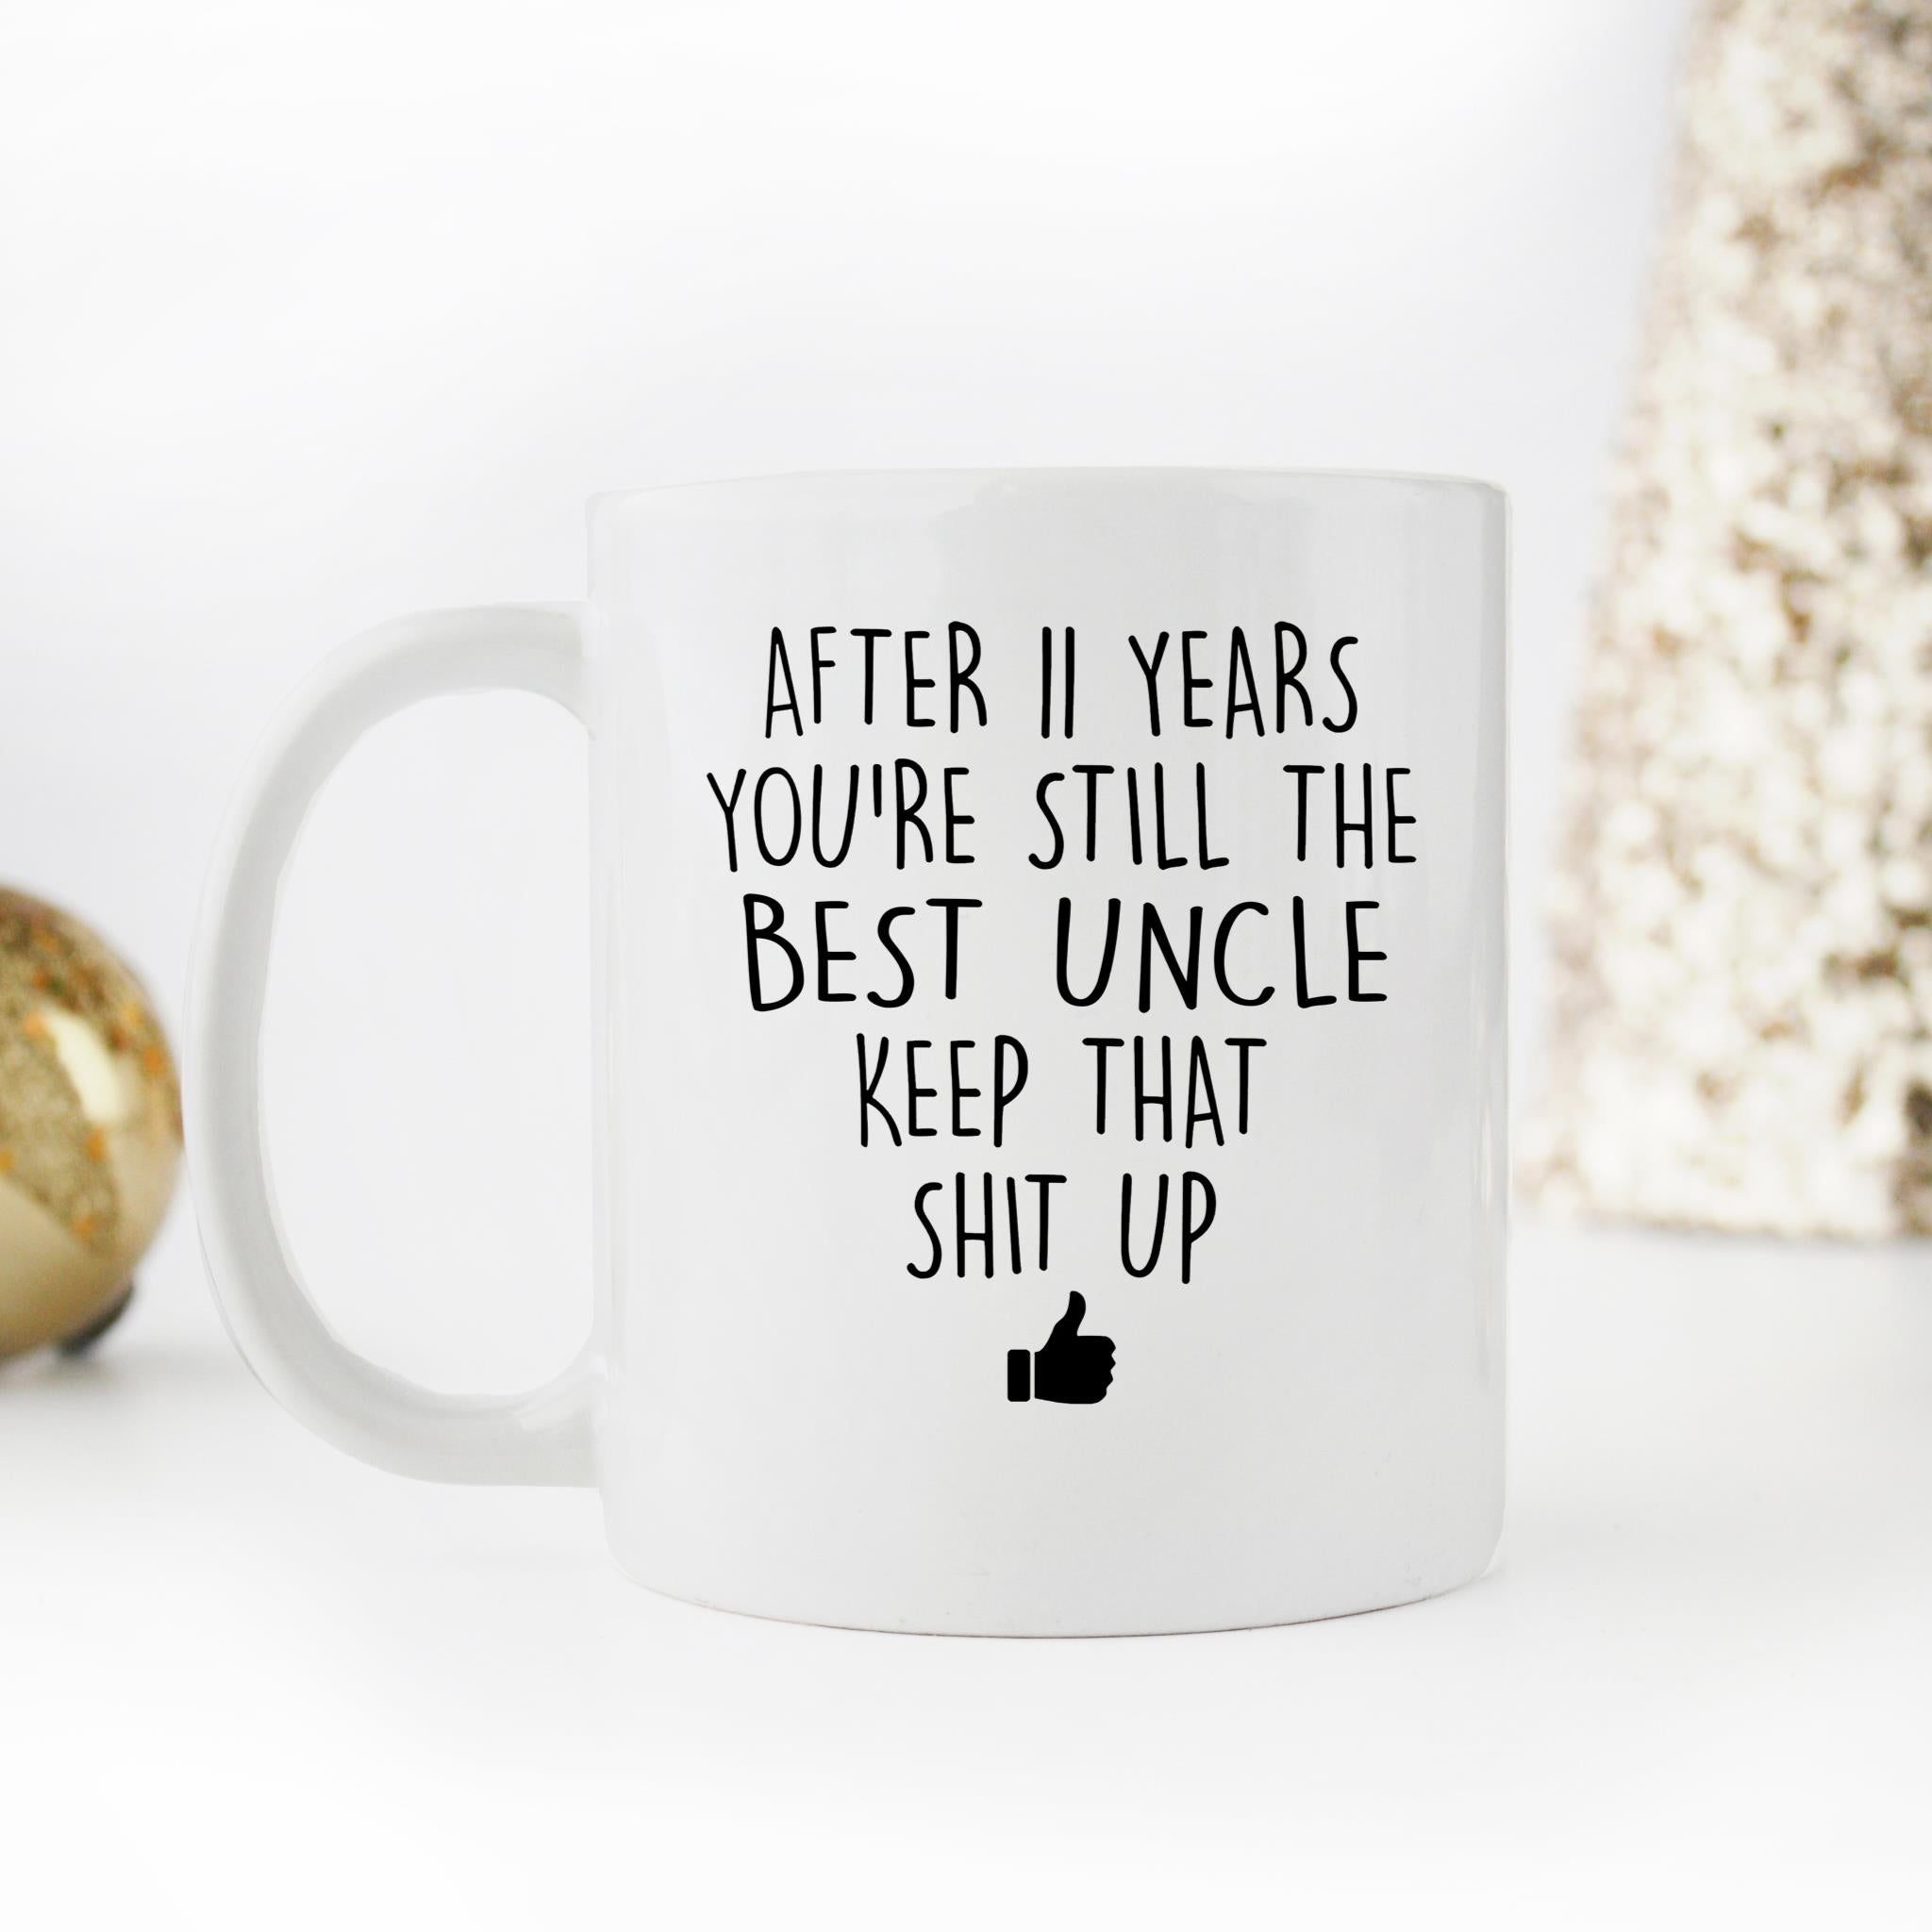 Skitongifts Funny Ceramic Novelty Coffee Mug After Custom Years You're Still The Best Uncle Keep That Shit Up 547AO5B